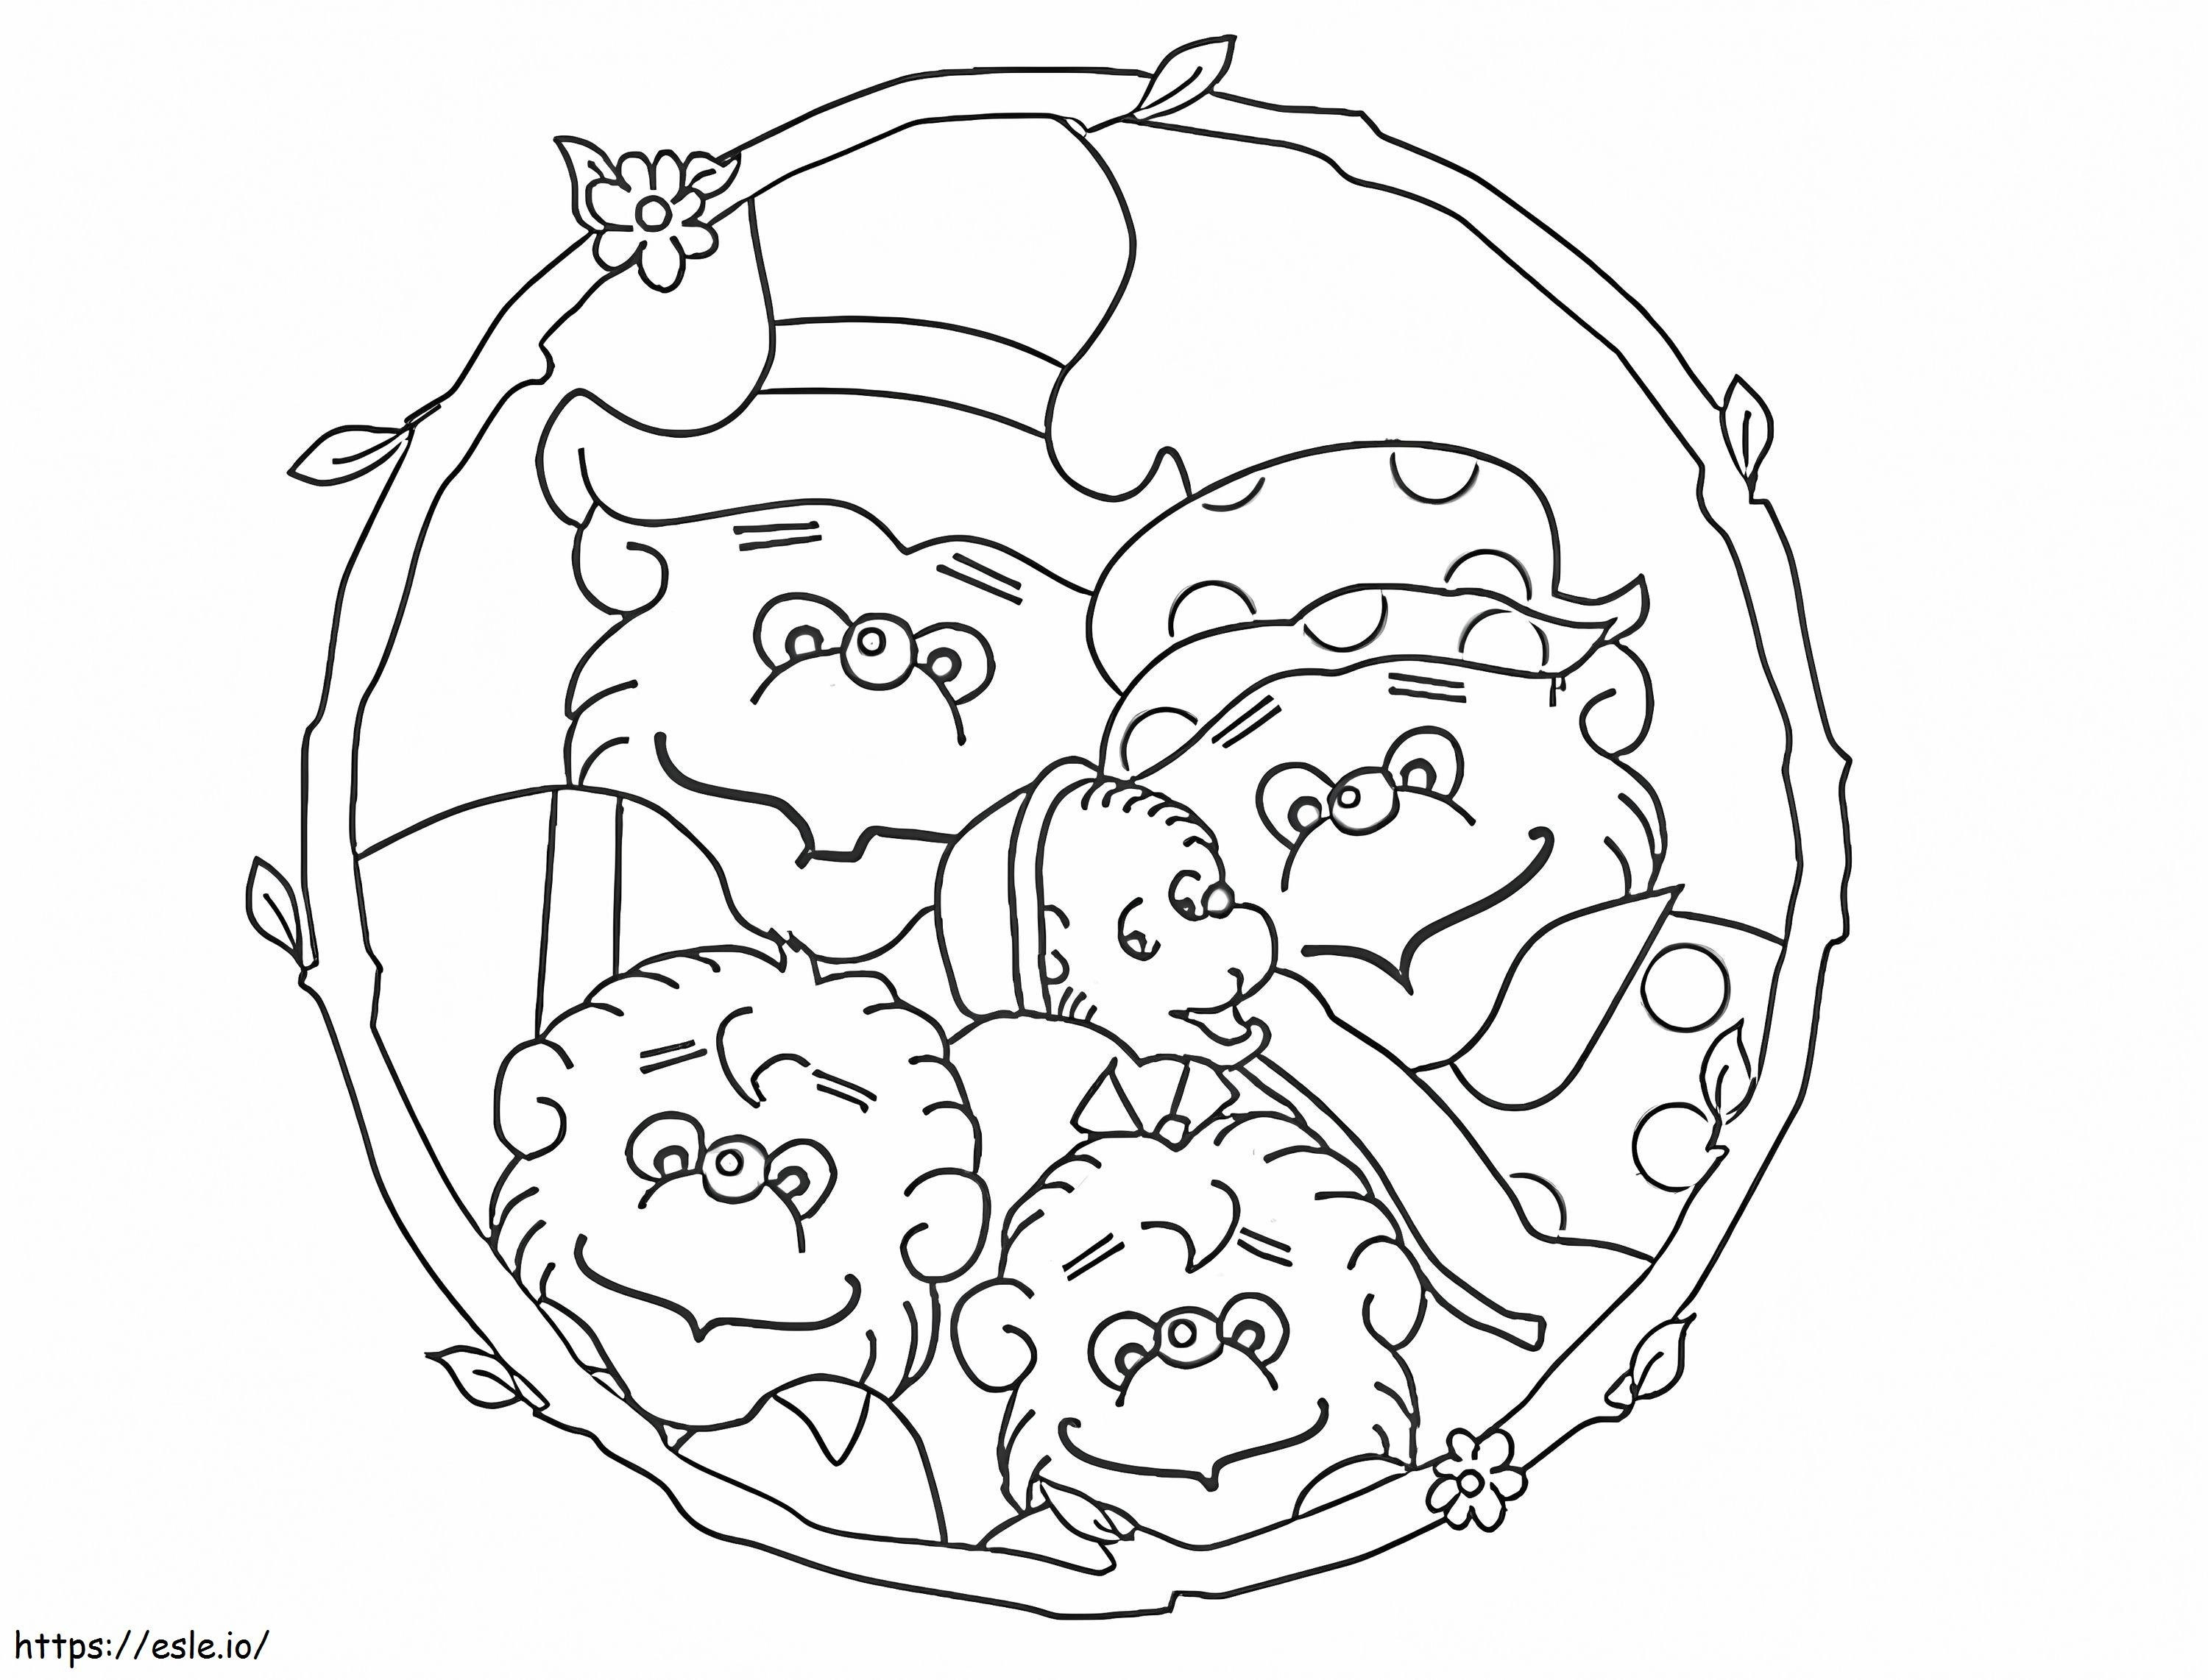 The Berenstain Bears coloring page